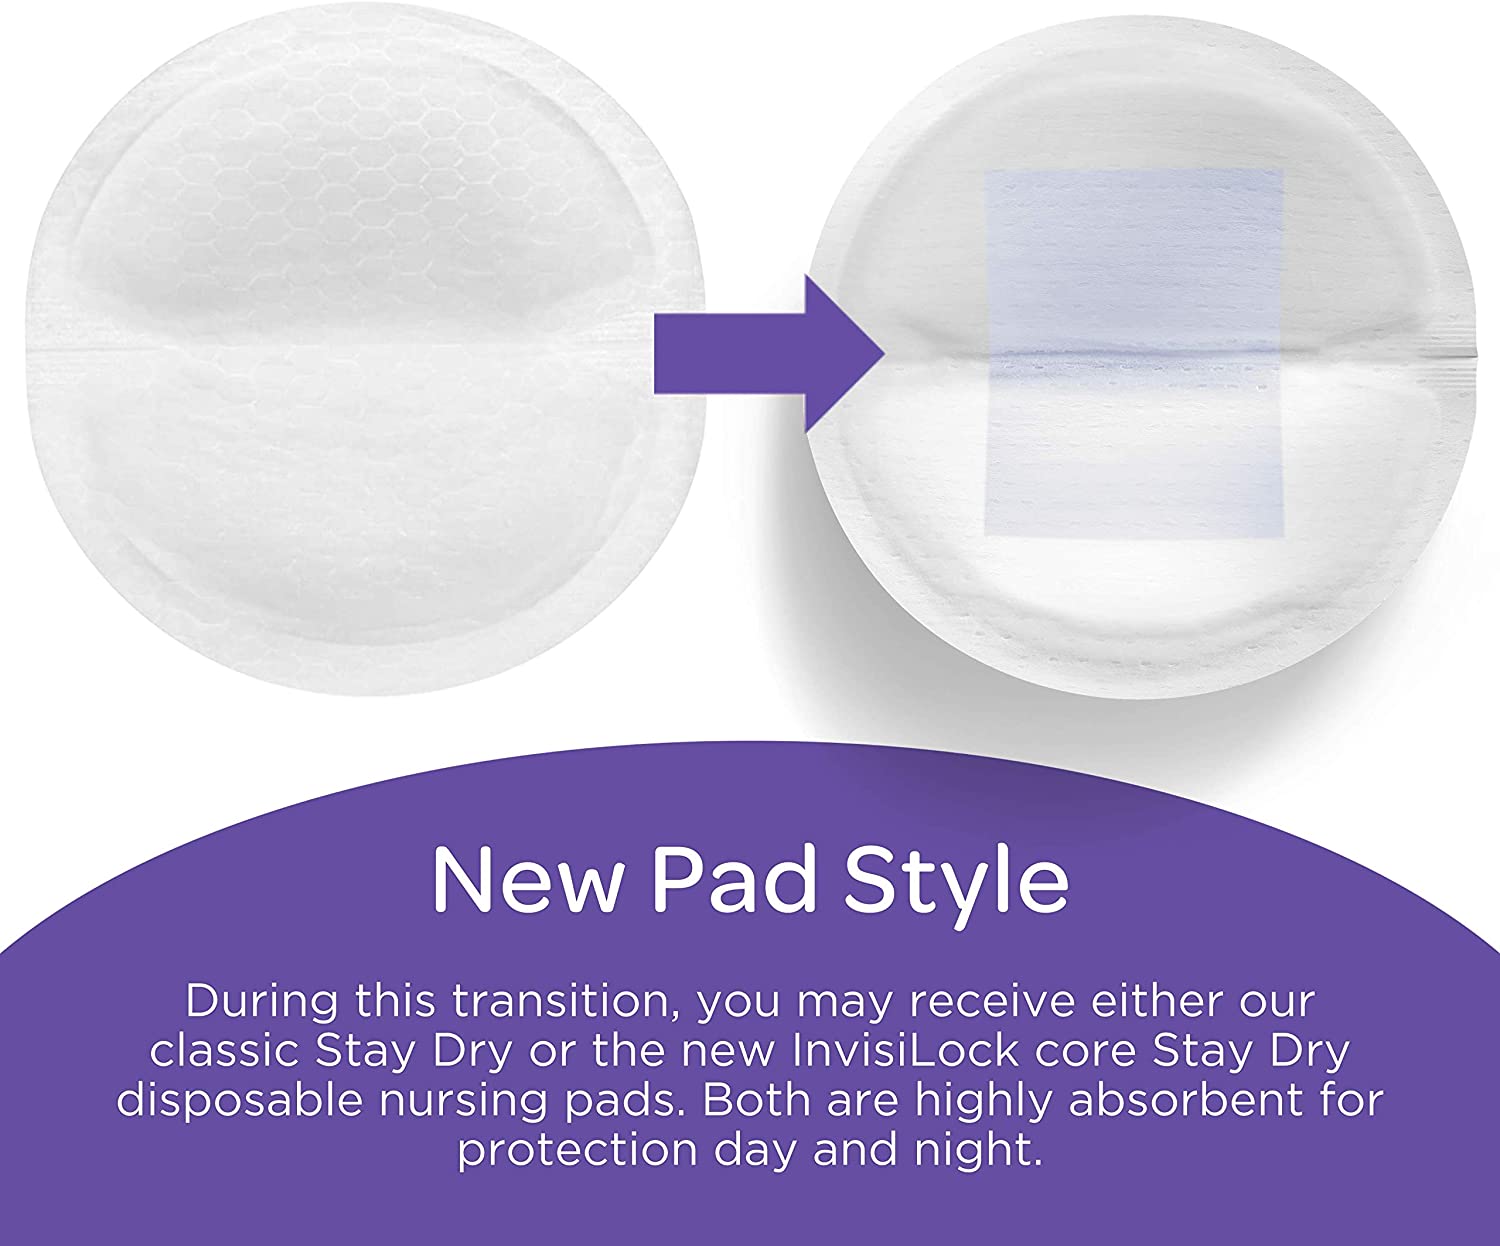 Lansinoh - Disposable Breast Pads (Pack of 60)